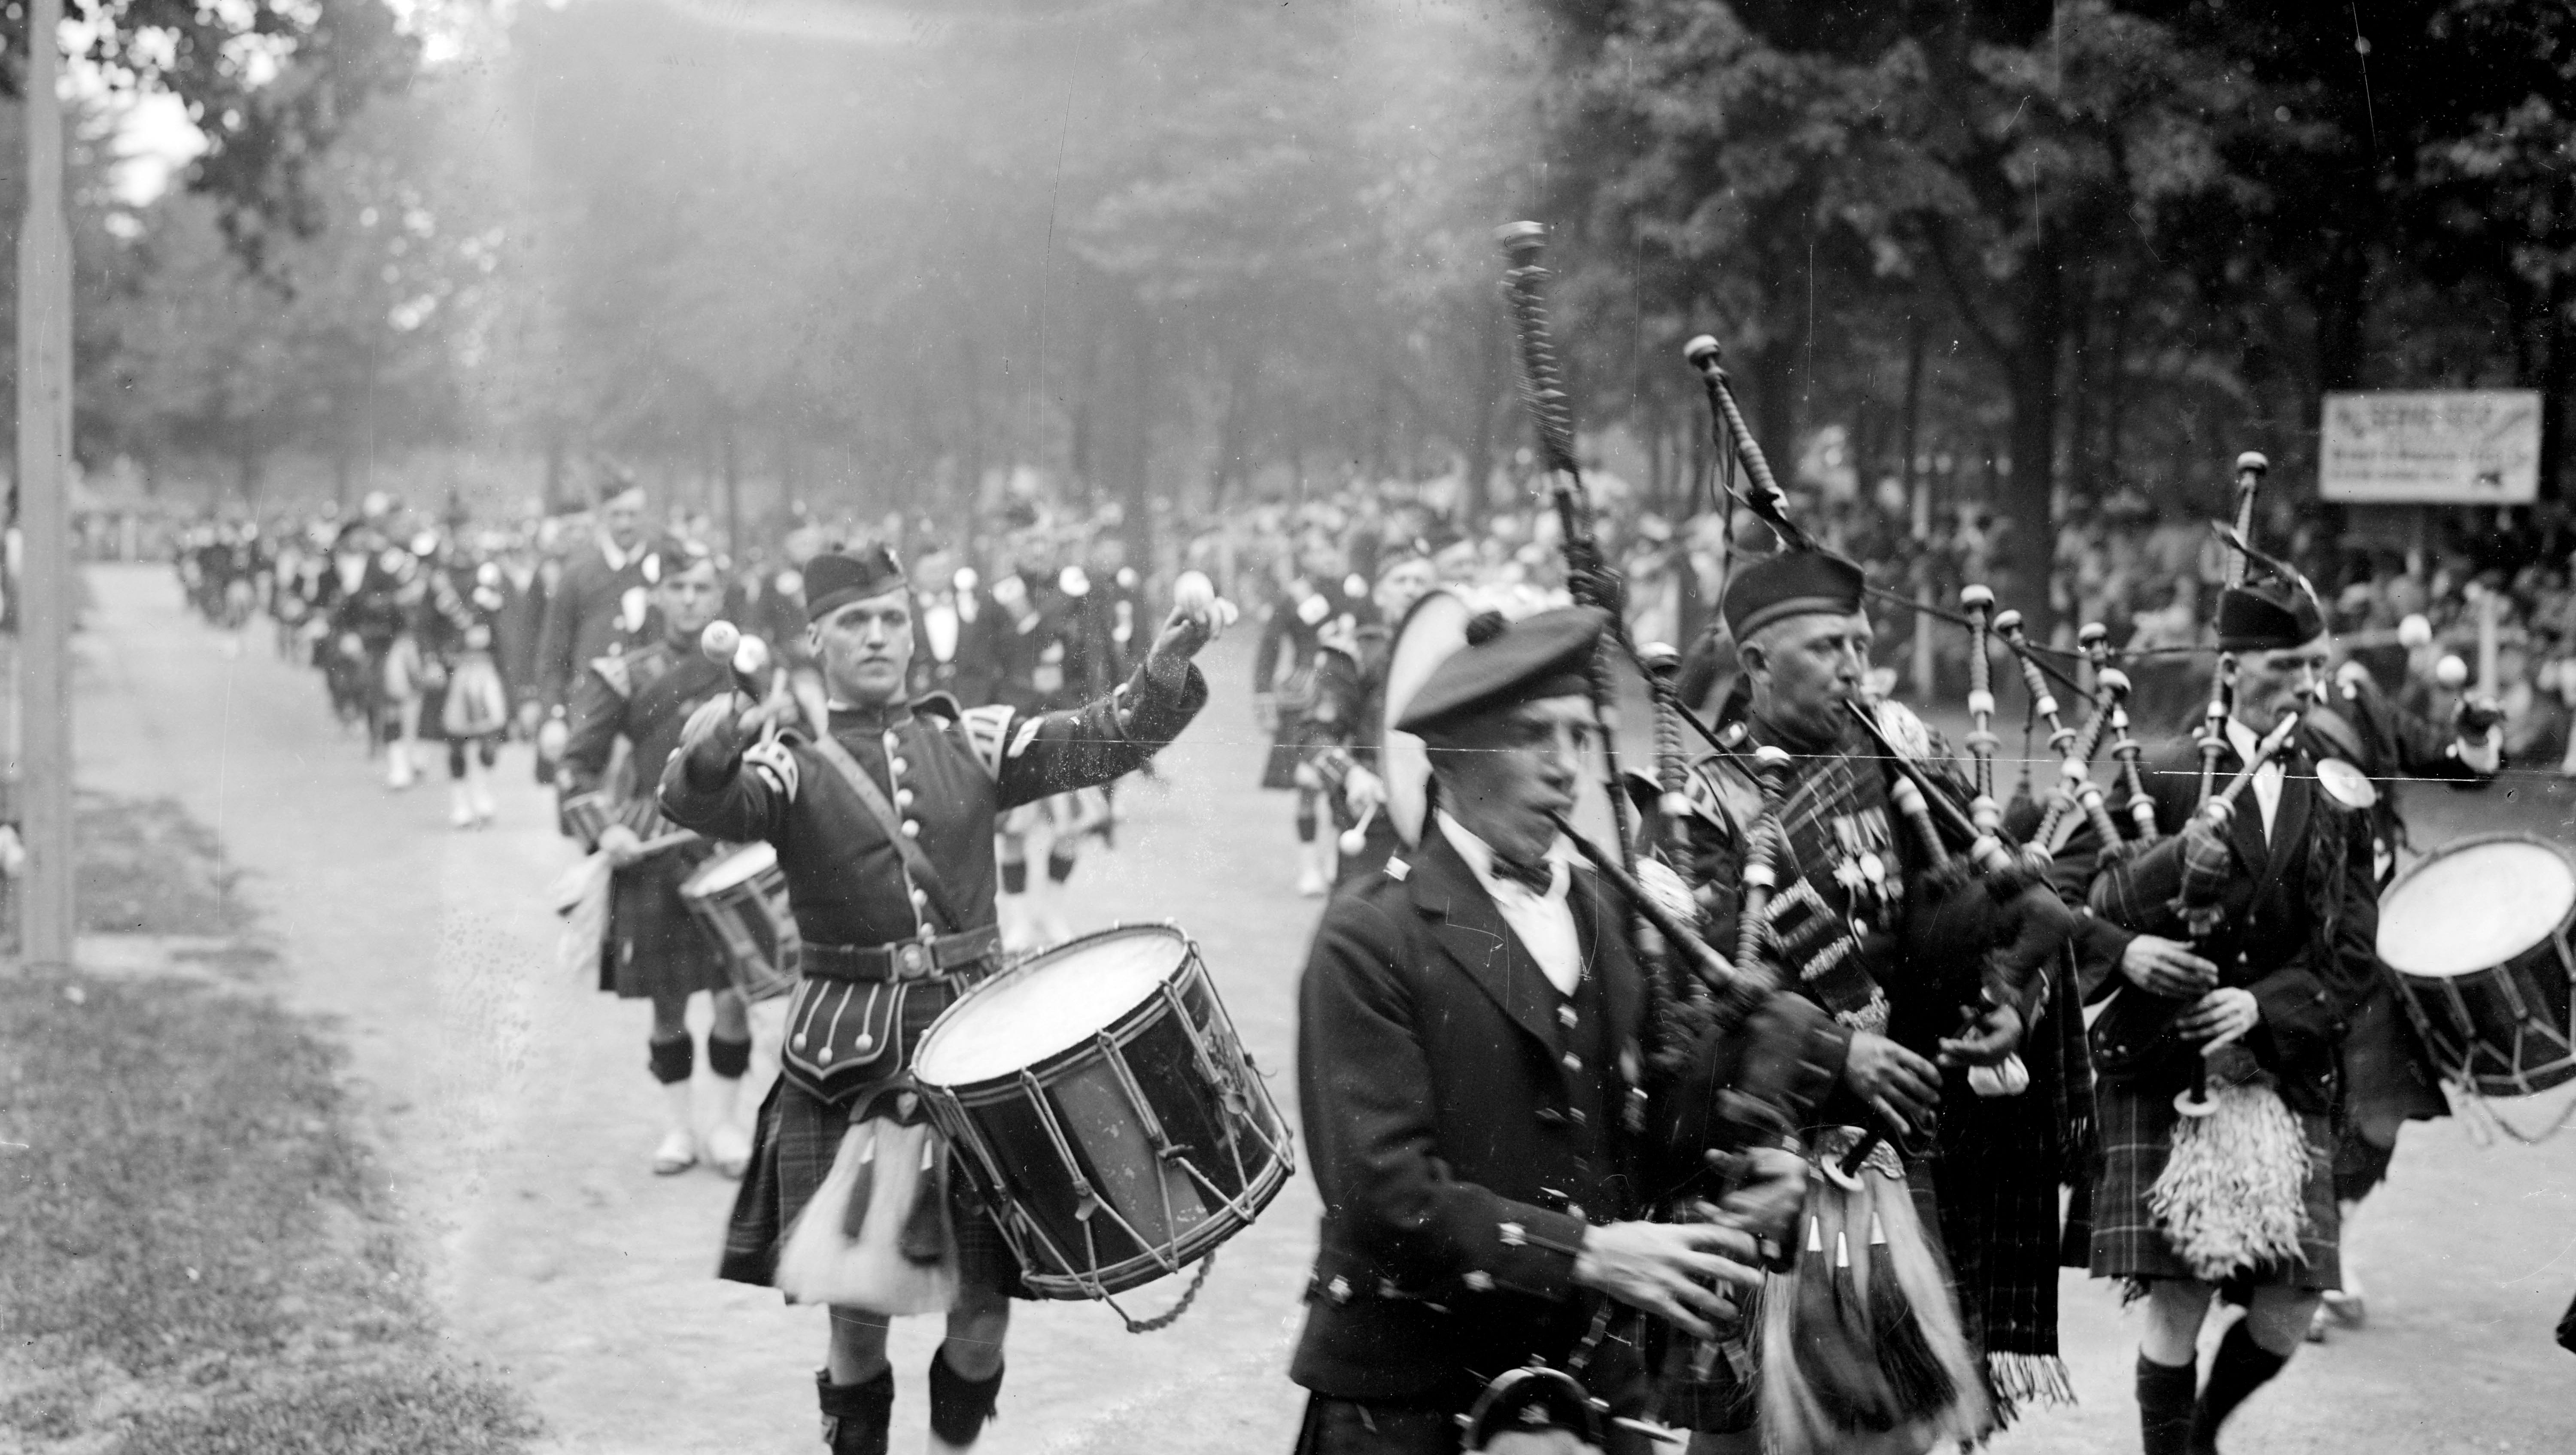 The St. Andrew’s Society celebrates its Scottish heritage on Boblo in the 1920s.